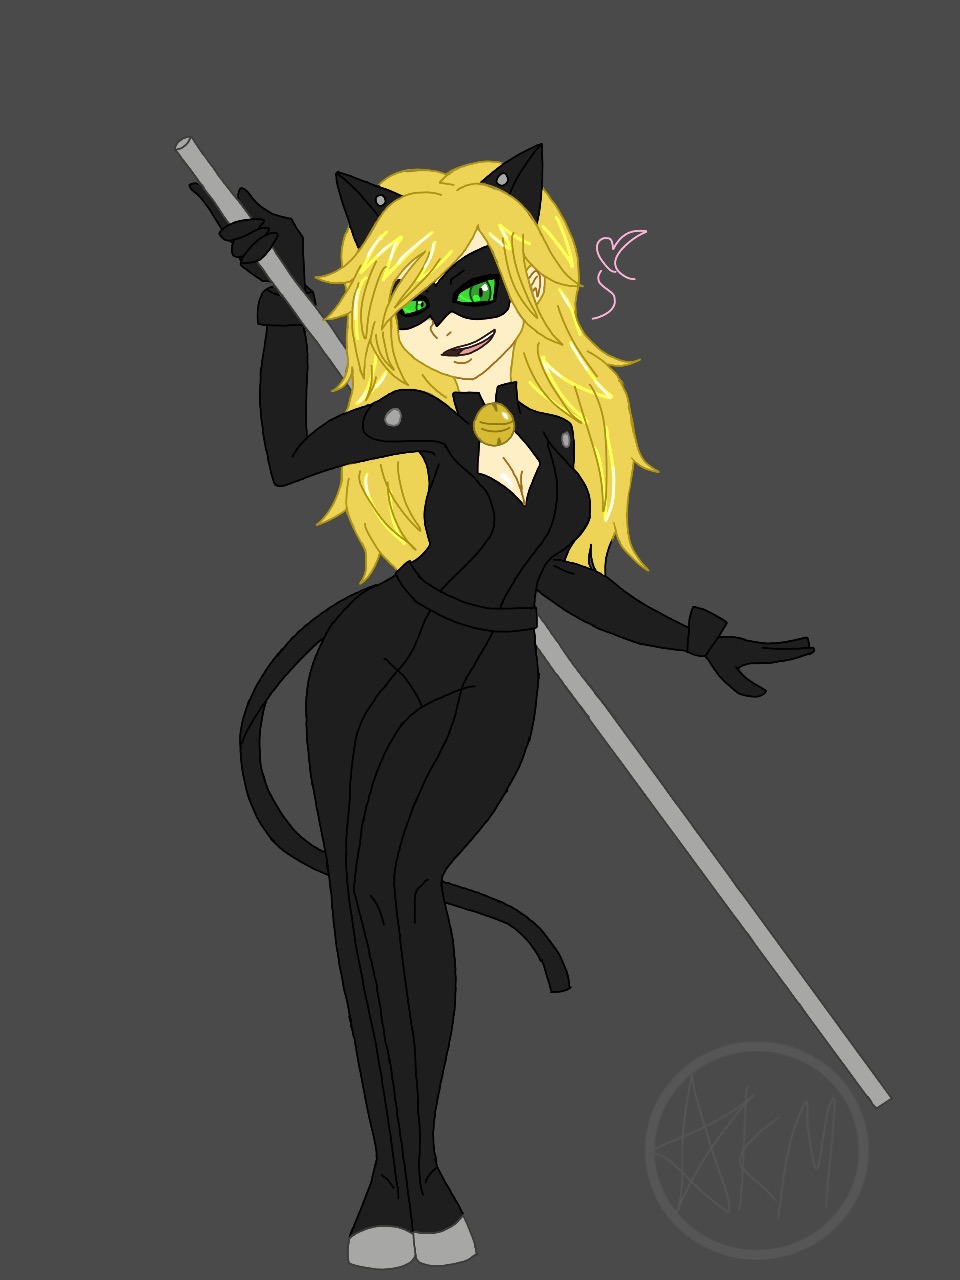 Gender swapped chat noir.